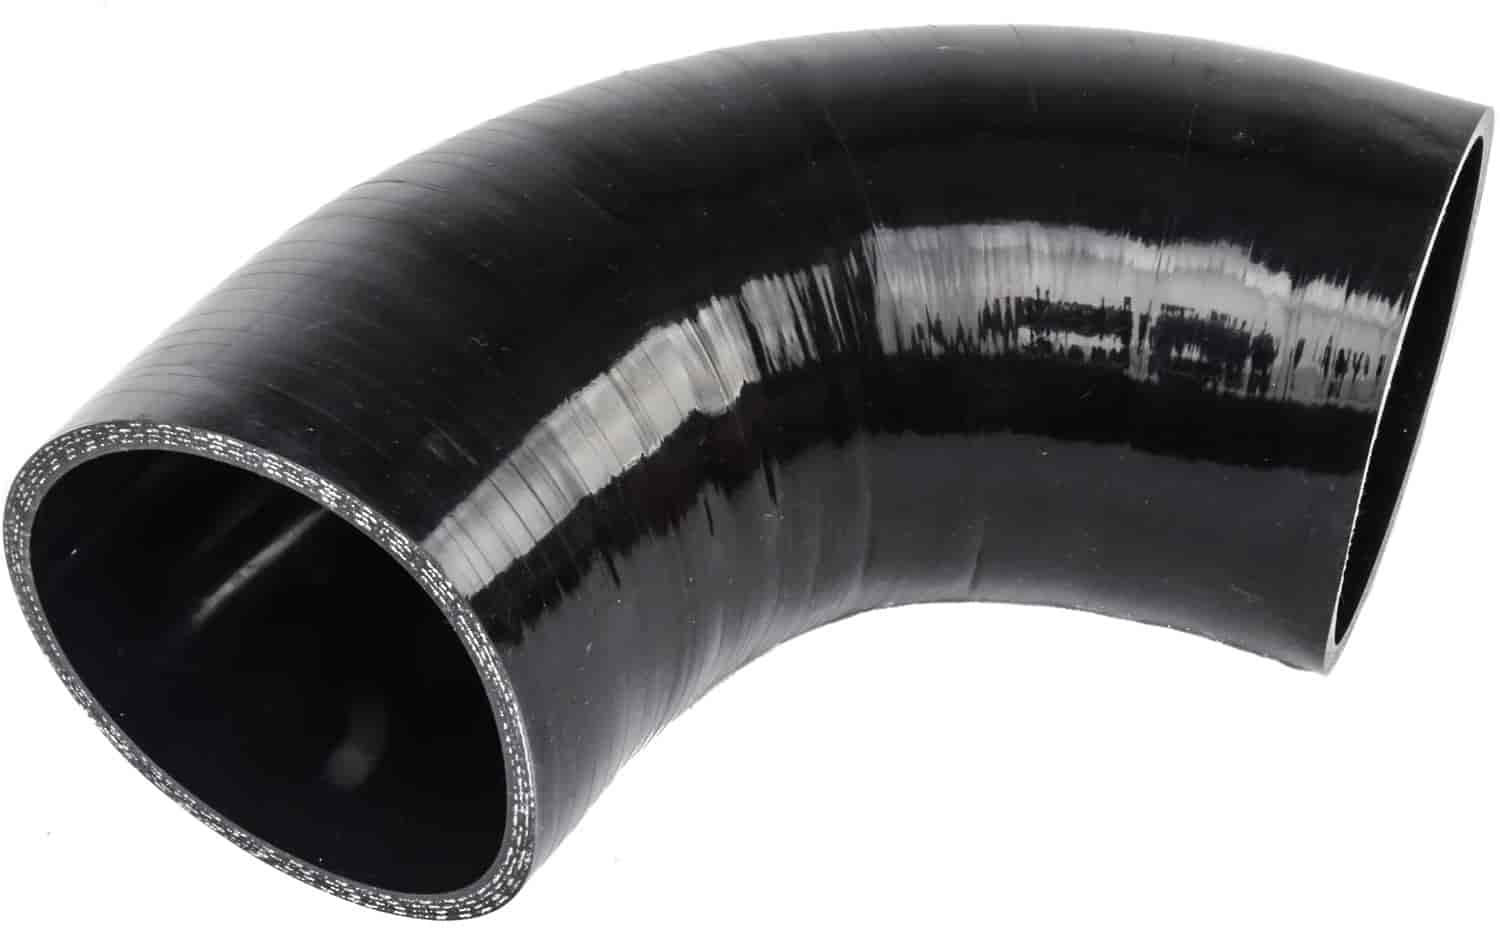 90 Degree Silicone Hose Connector4" I.D. x 6" Long